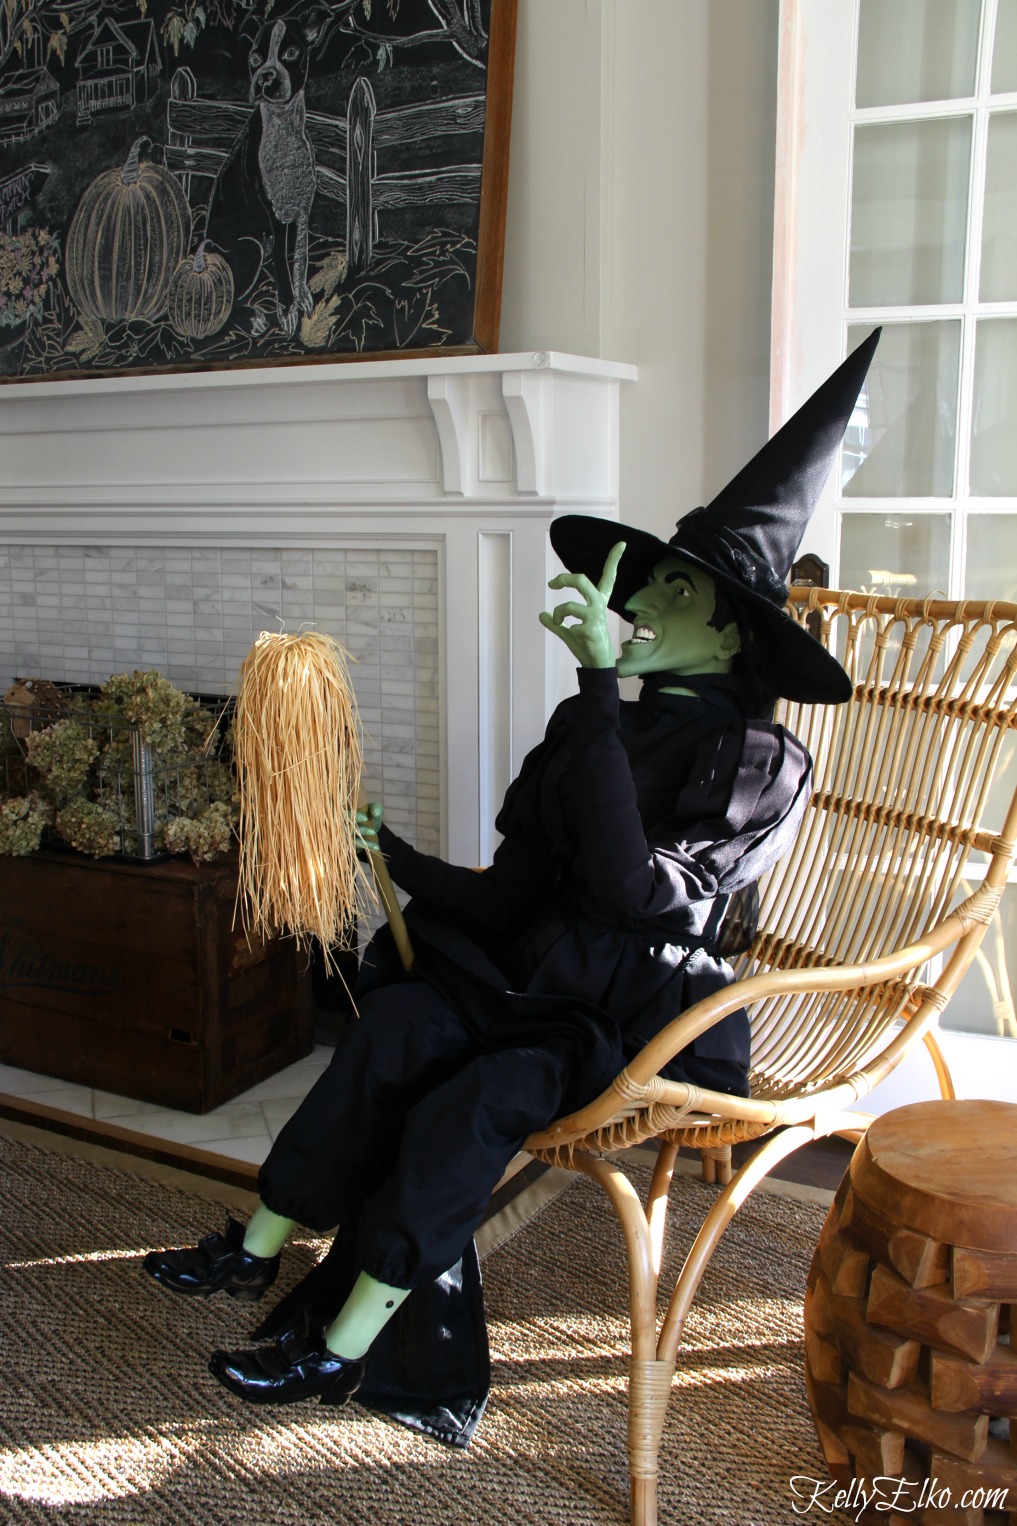 Quick Easy Halloween Decor - love this life size Wicked Witch of the West kellyelko.com